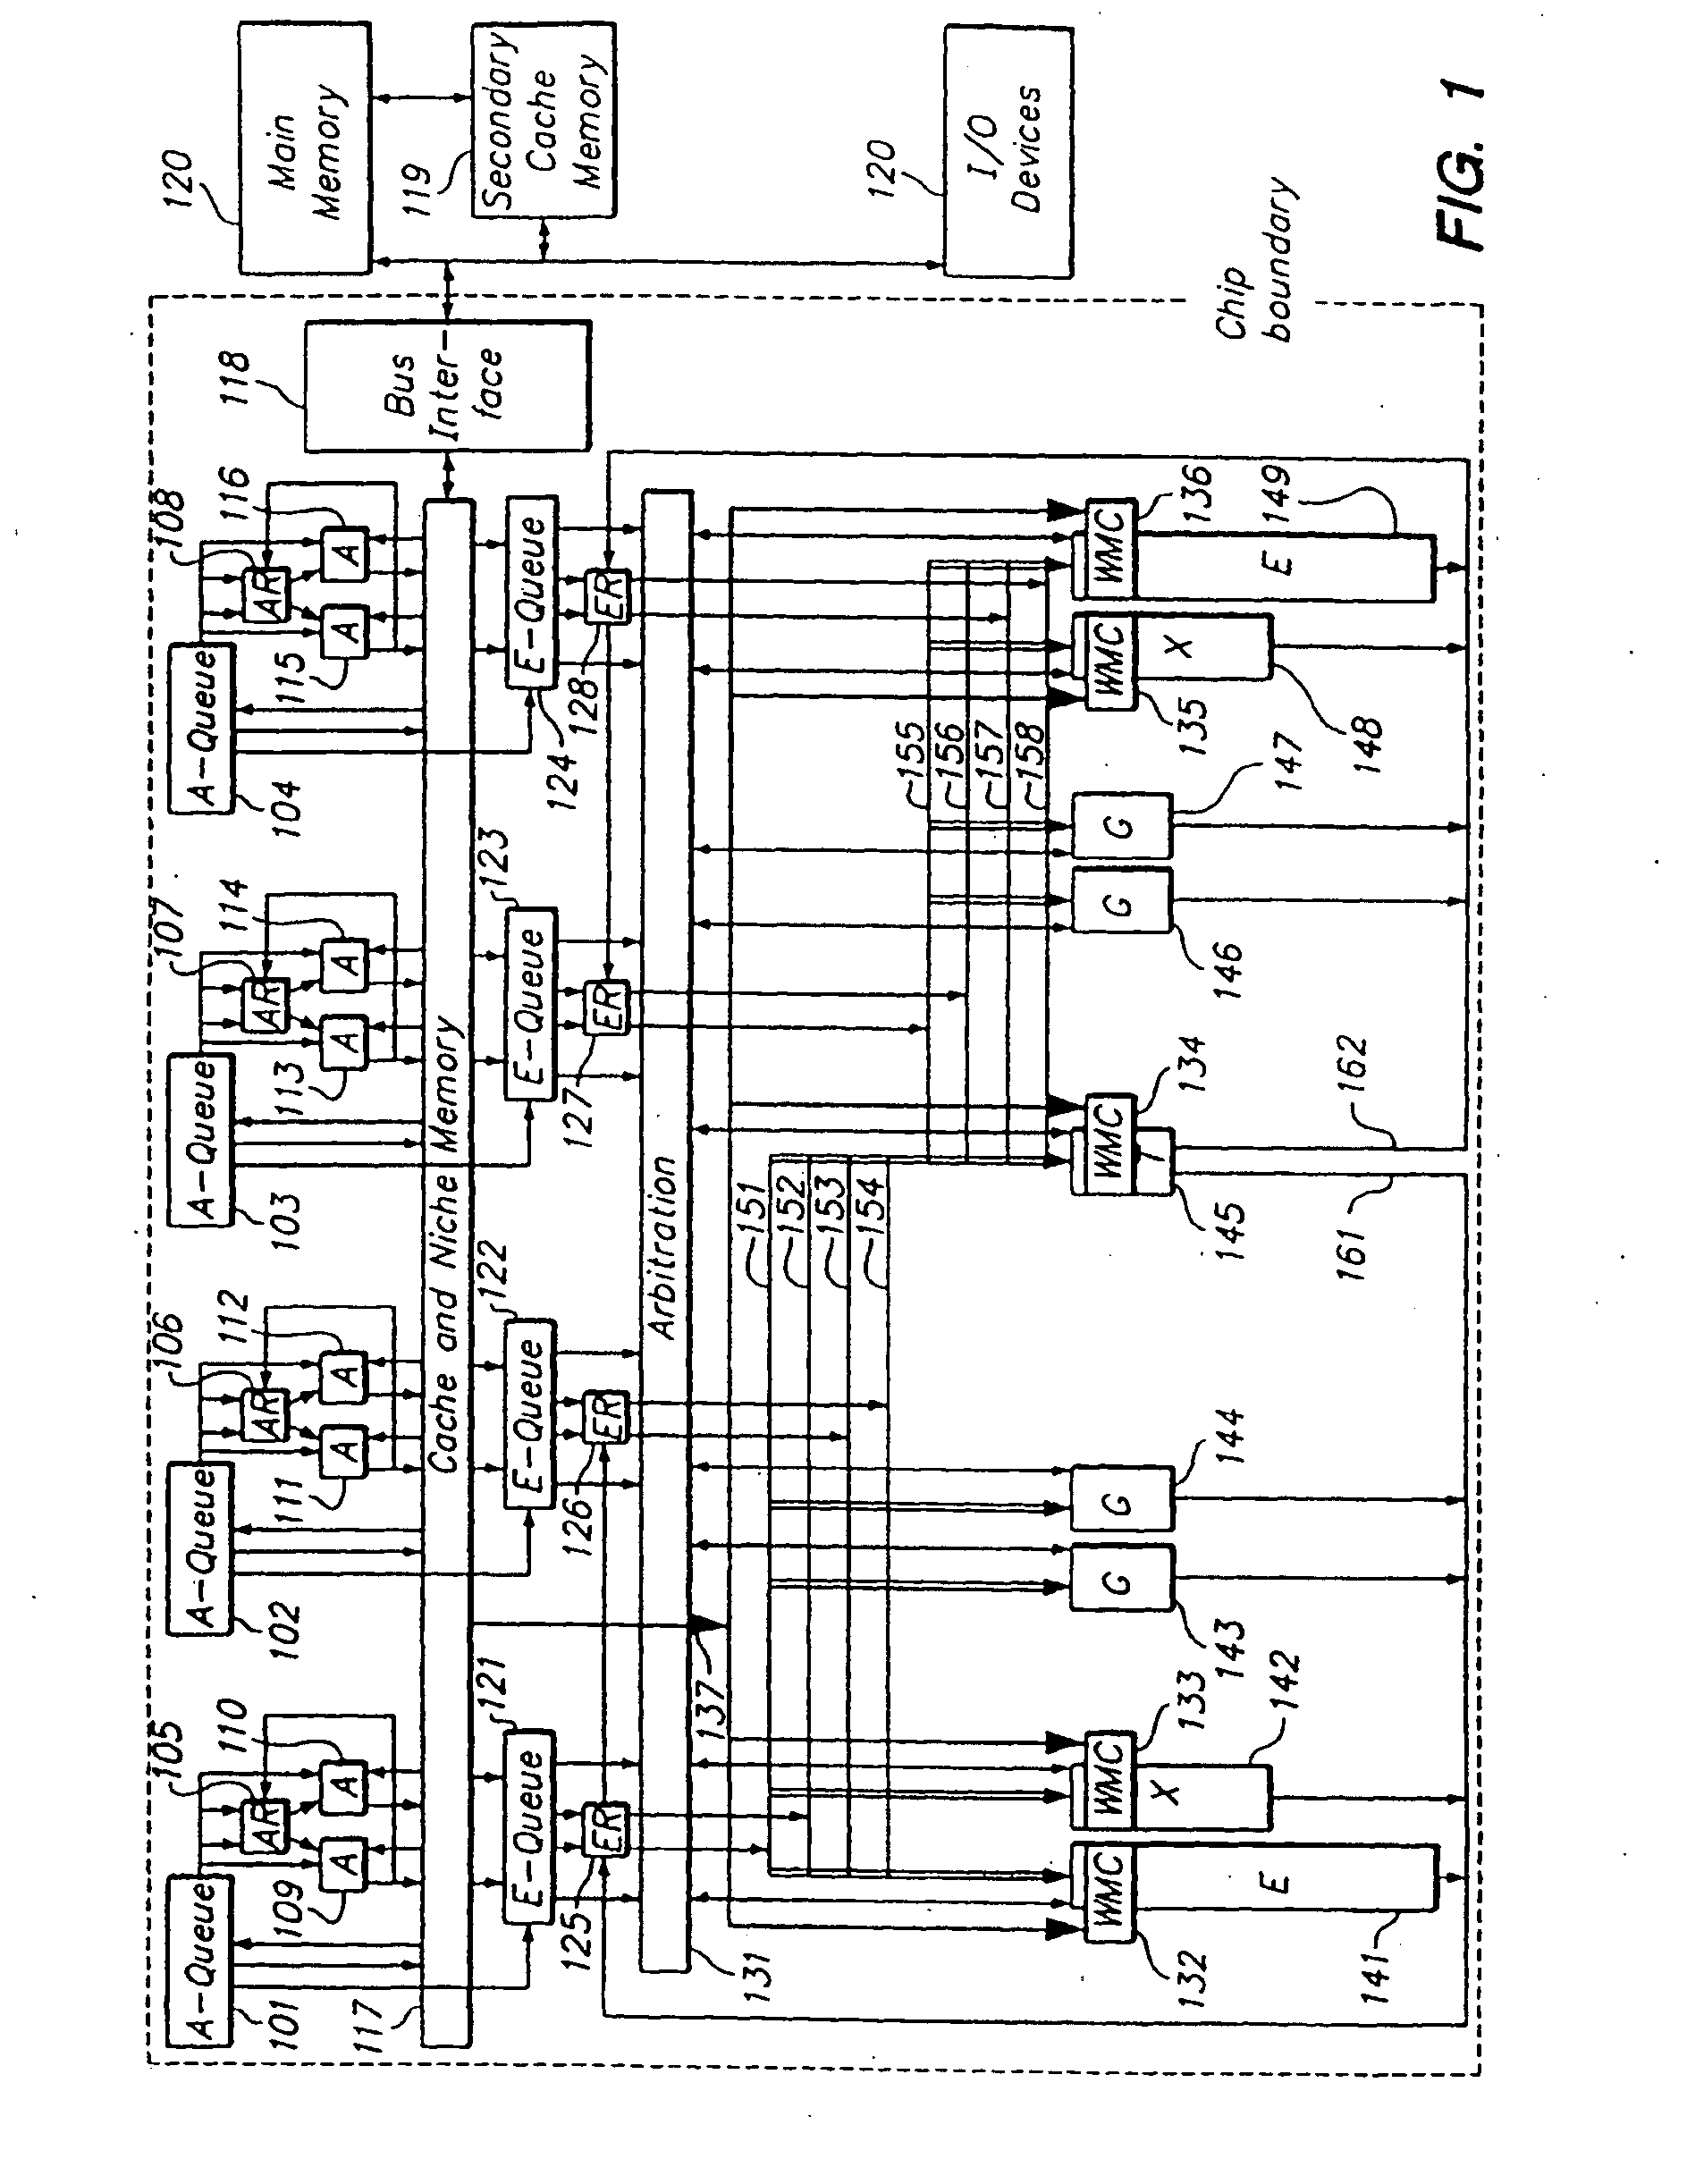 Processor for executing switch and translate instructions requiring wide operands